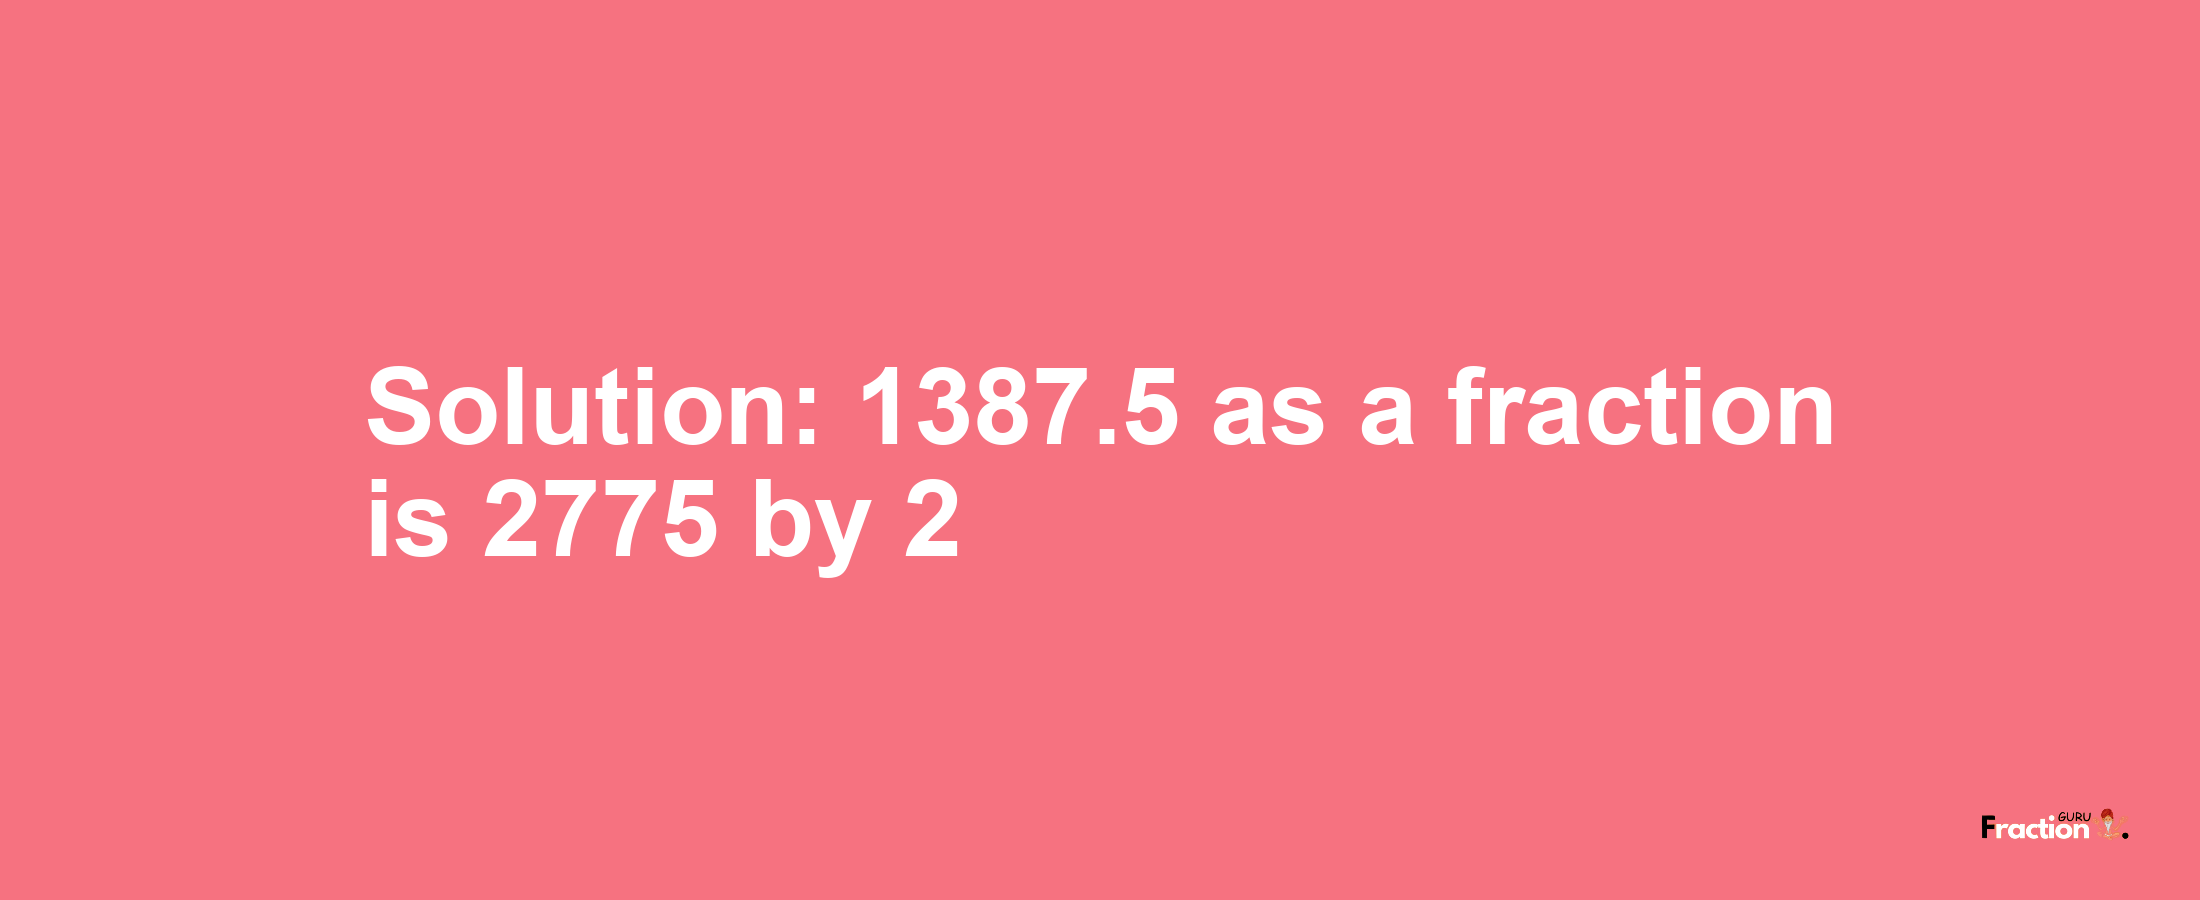 Solution:1387.5 as a fraction is 2775/2